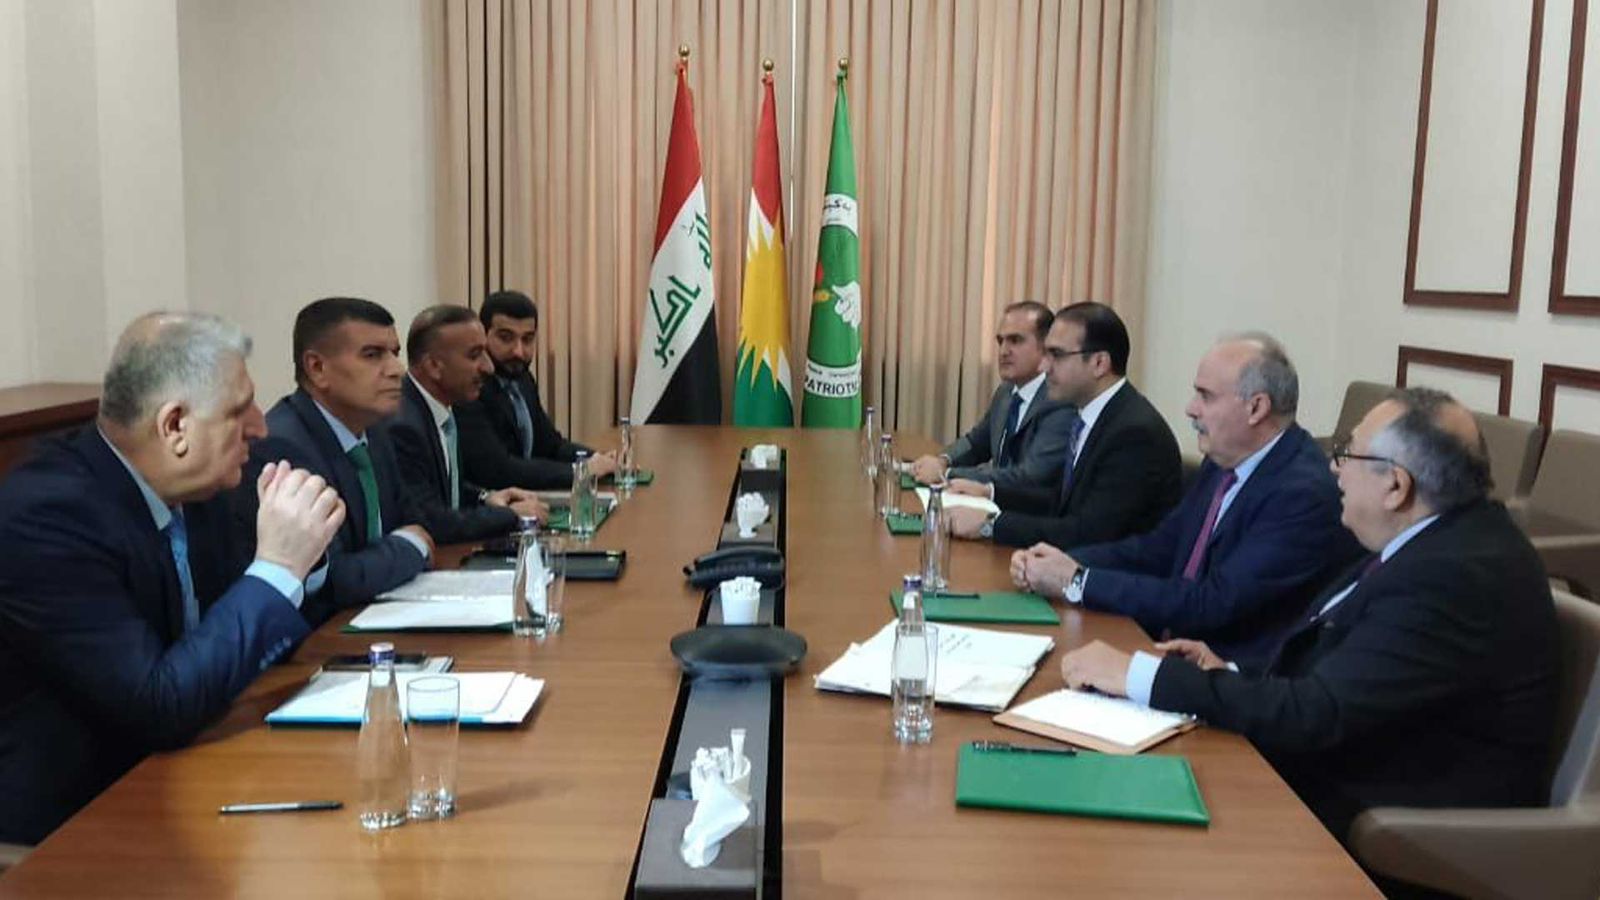 KDP, PUK to discuss election preparations in a meeting on Wednesday: lawmaker